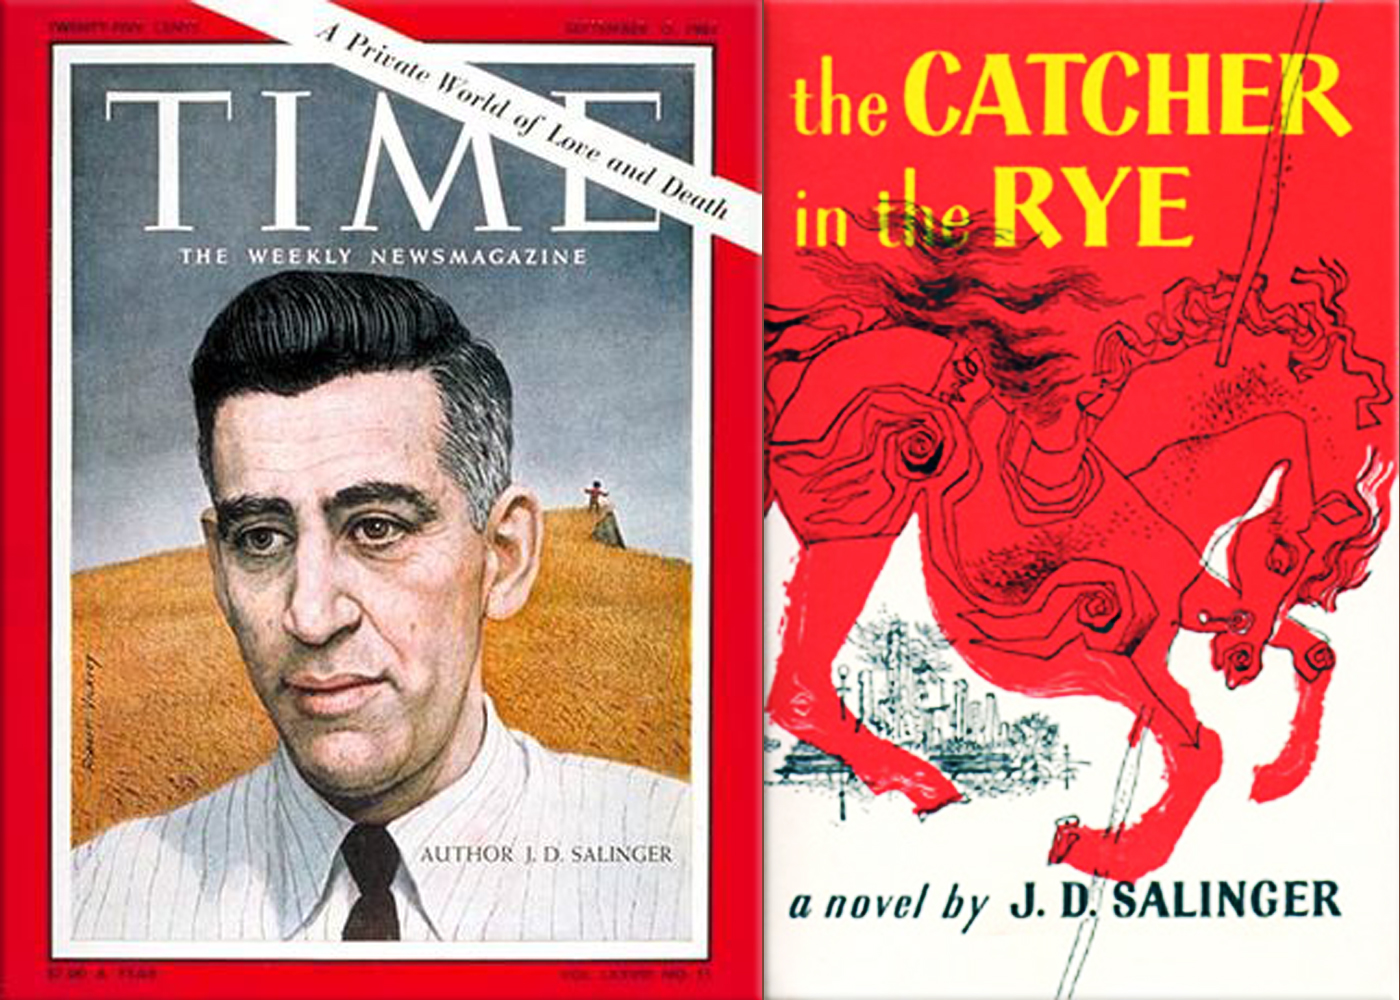 The Catcher in the Rye by J. D. Salinger is published for the first time by Little, Brown and Company